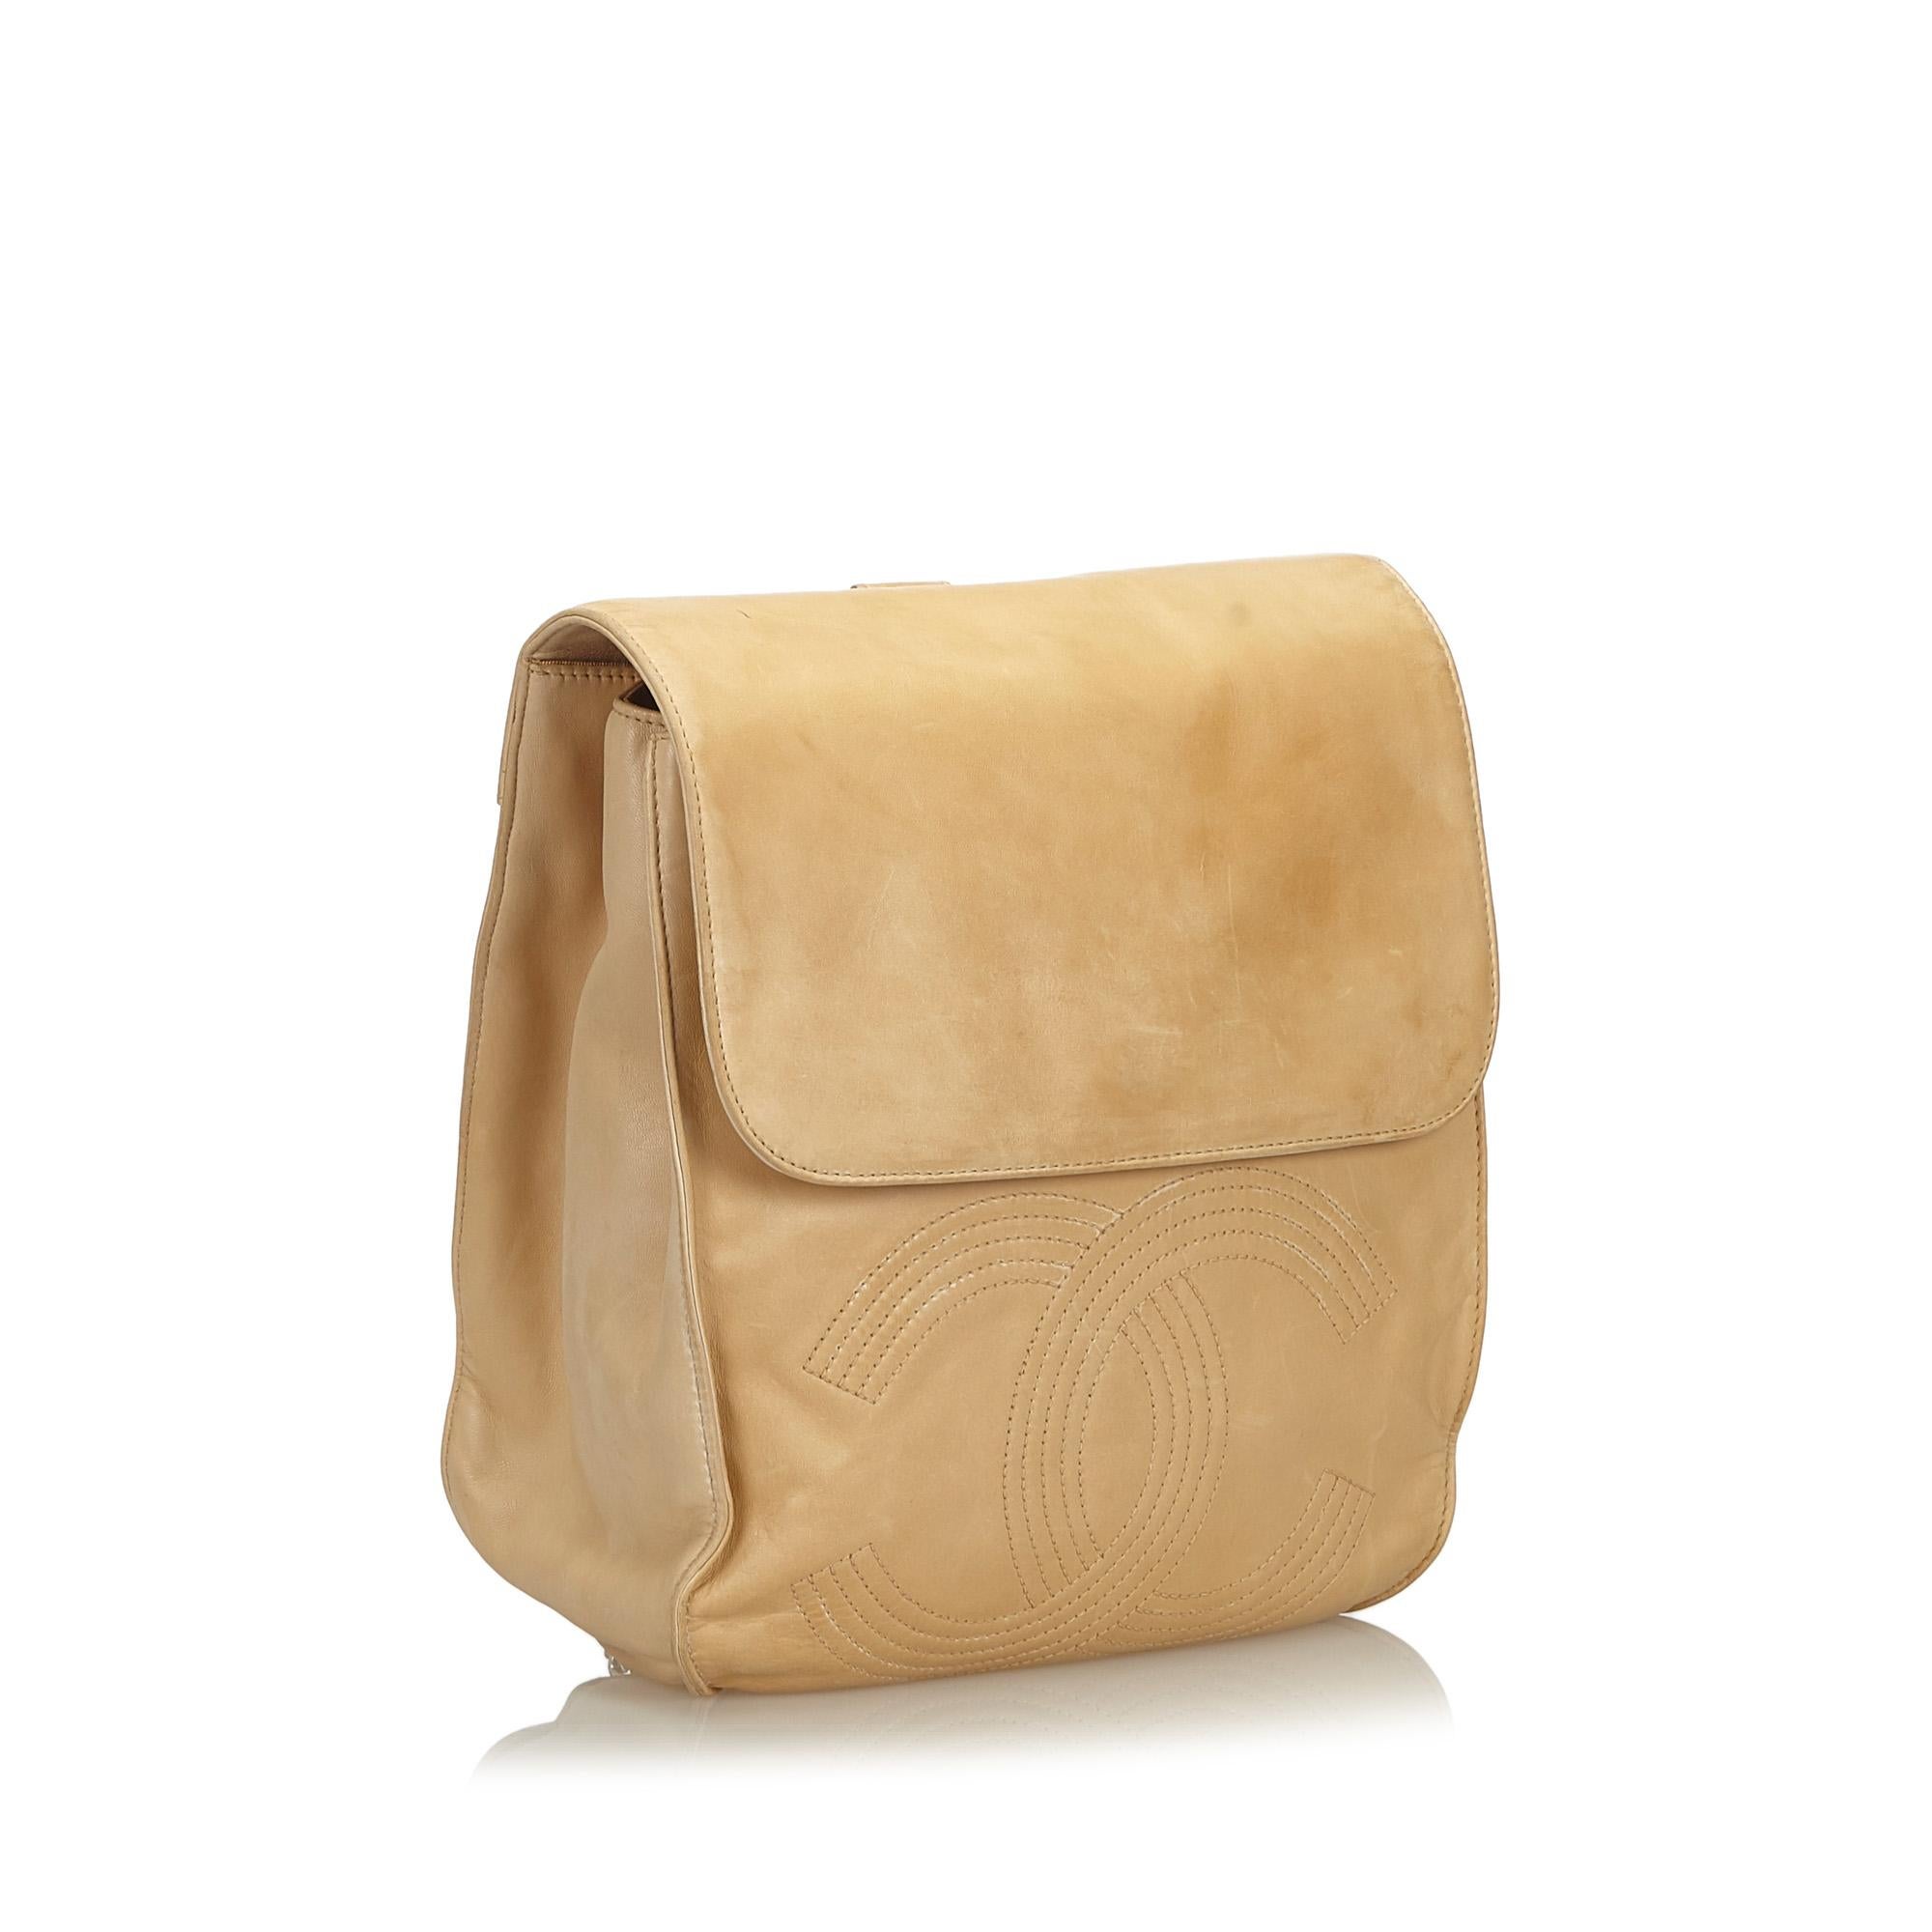 This backpack features a lambskin leather body, flat back straps, a front flap with a magnetic closure, and interior zip and slip pockets. It carries as B condition rating.

Inclusions: 
Authenticity Card

Dimensions:
Length: 35.00 cm
Width: 26.00